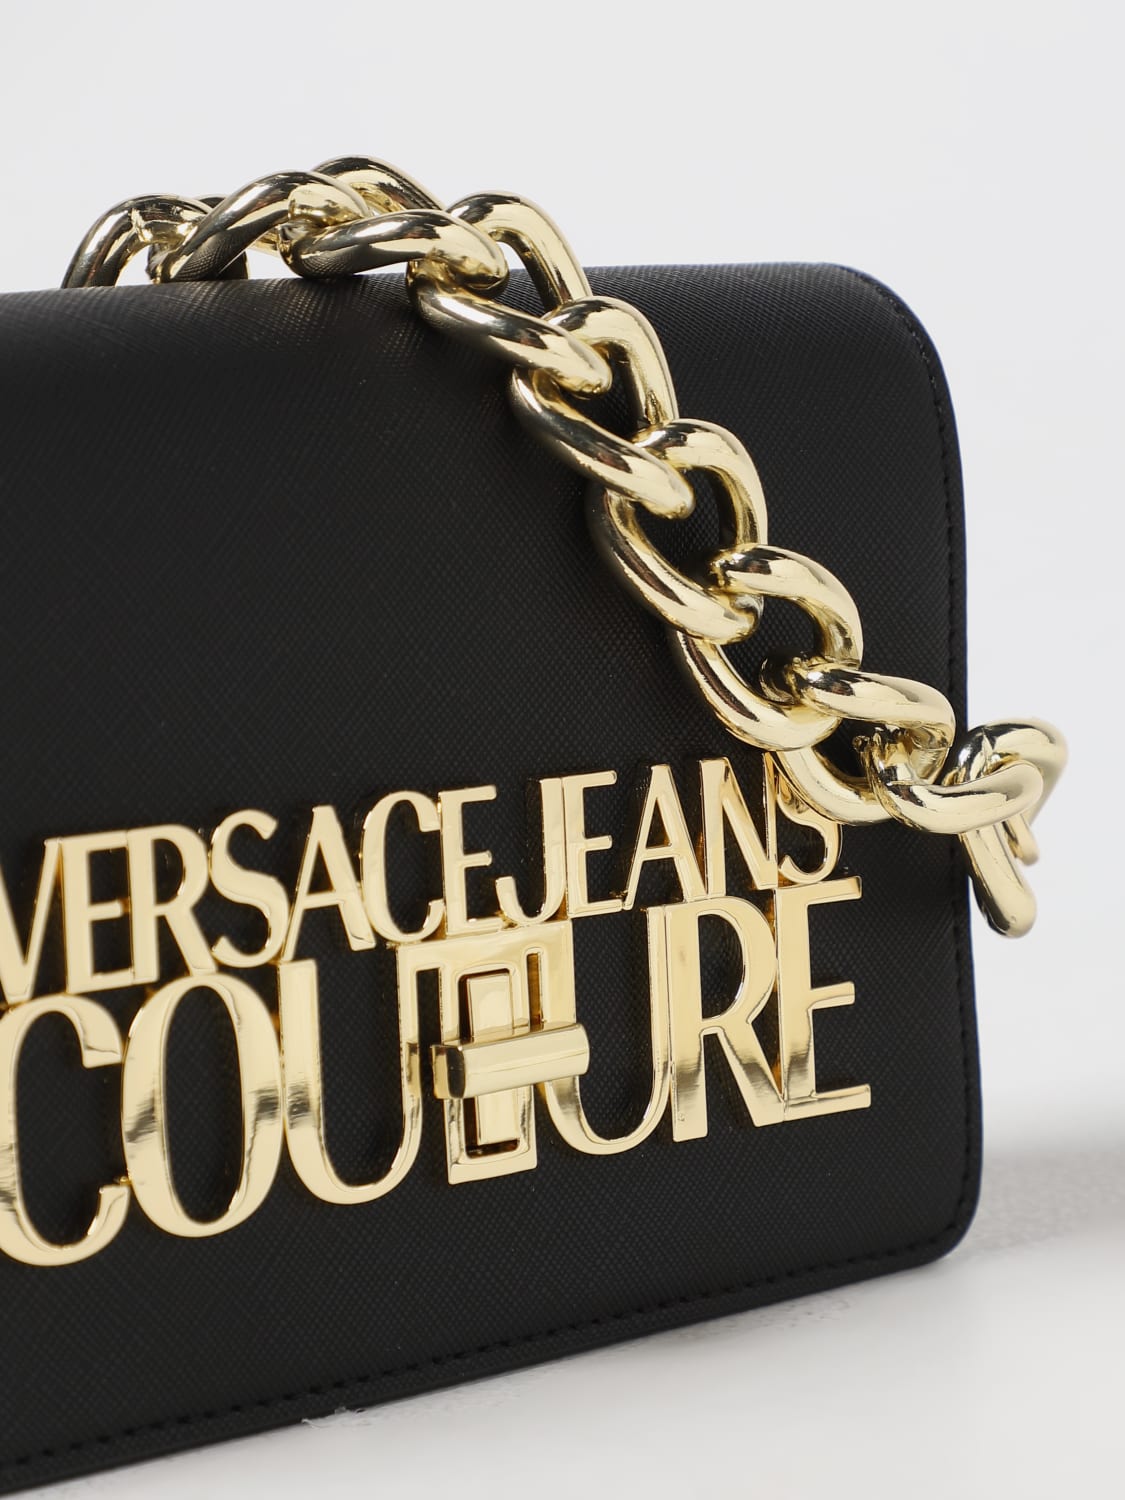 VERSACE JEANS COUTURE: bag in saffiano synthetic leather - Black ...